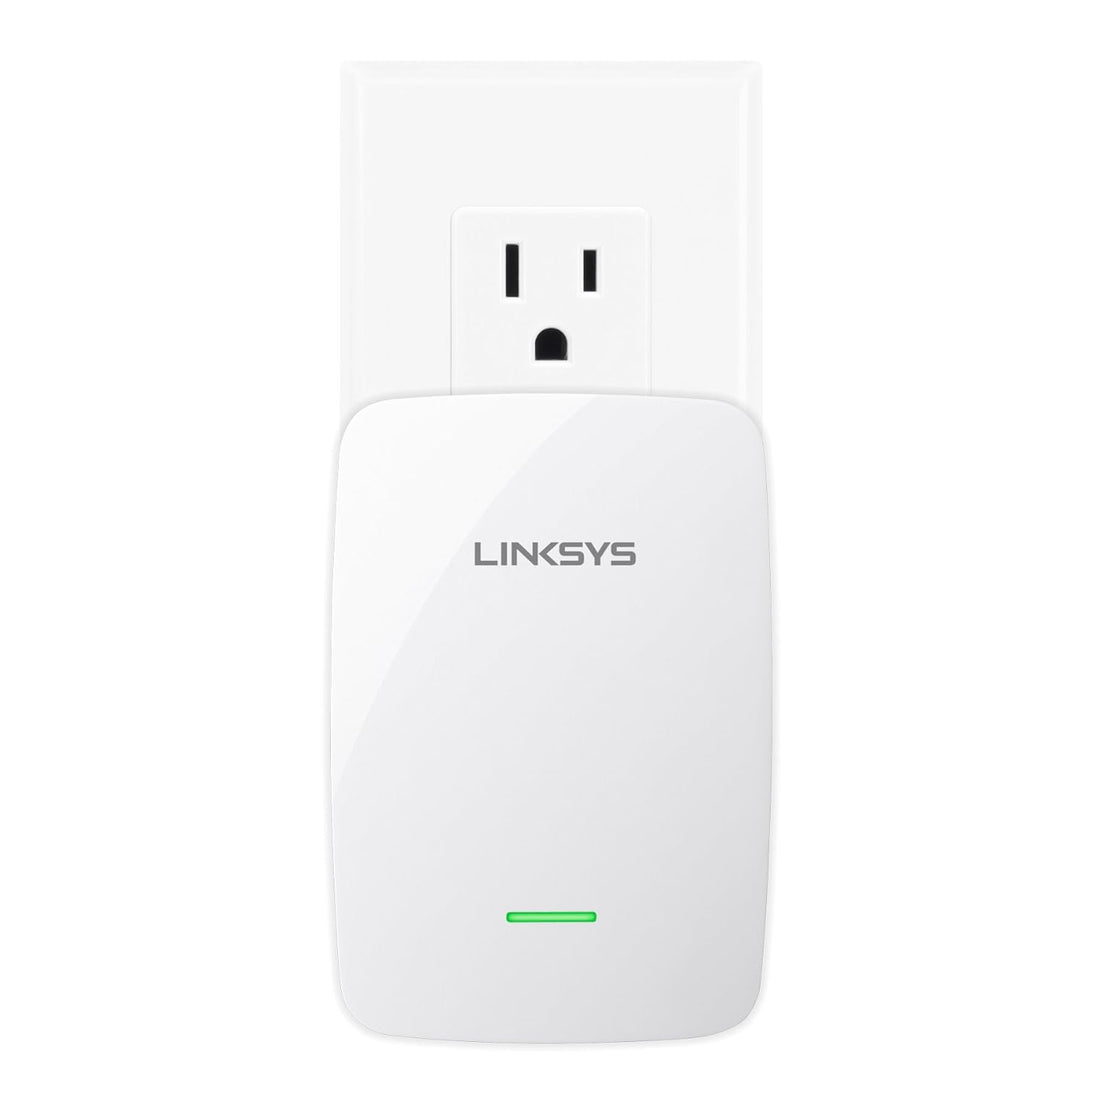 Linksys RE4100-N600 Pro Wi-Fi Range Extender with Built-in Audio Port (White)